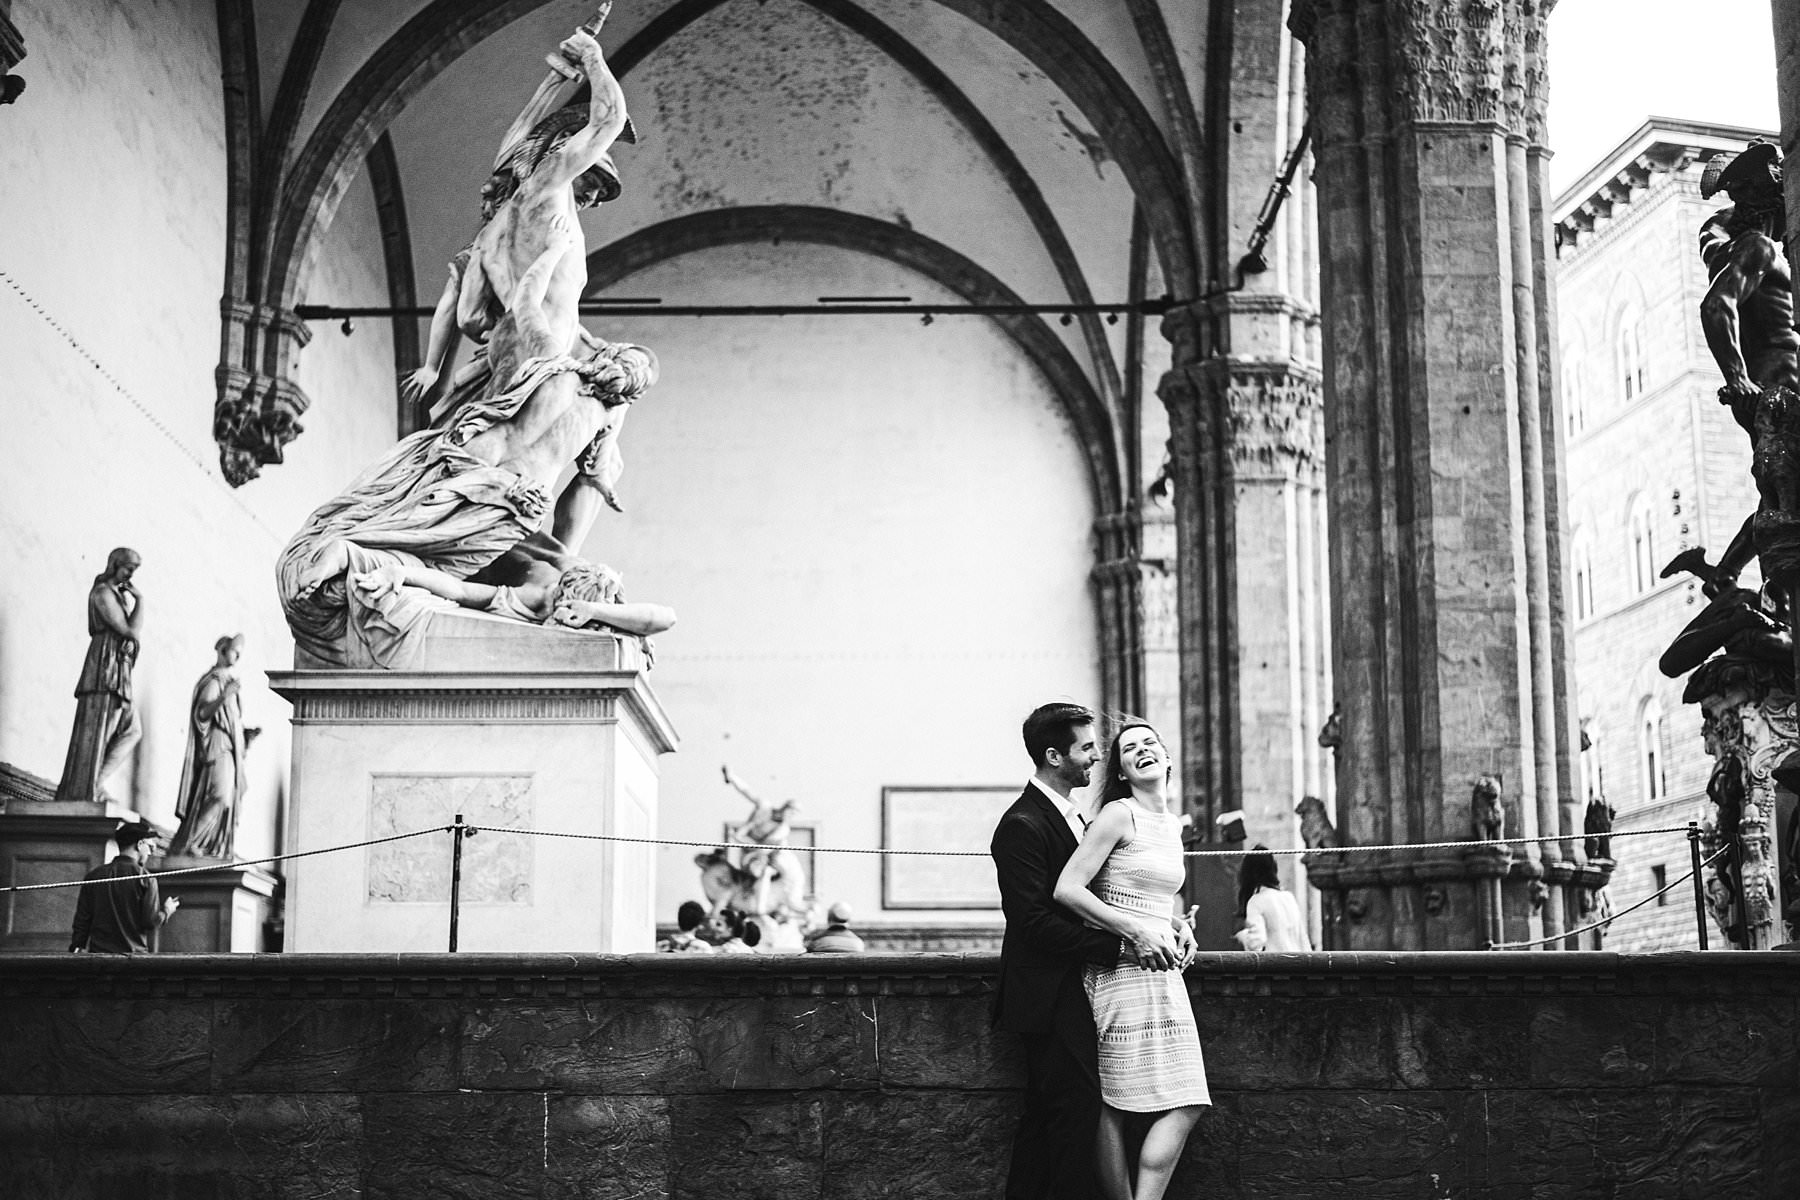 A sunset photoshoot to cherish your engagement forever. Some moments in life deserve to be celebrated in a special way. A way that makes them even more unique and unforgettable. That’s the case of a birth, a family milestone, a wedding, or an engagement. And what’s better than a sunset photoshoot in an incredible city like Florence, to honor such an occasion? Considered the cradle of the Renaissance, Florence is full of fascinating spots that work perfectly as settings for a sunset photoshoot. Its very heart, where white marble statues give way to wooden portals and to the intricately decorated façades of historic churches, welcomed the couple for a series of shots filled with smiles and emotions